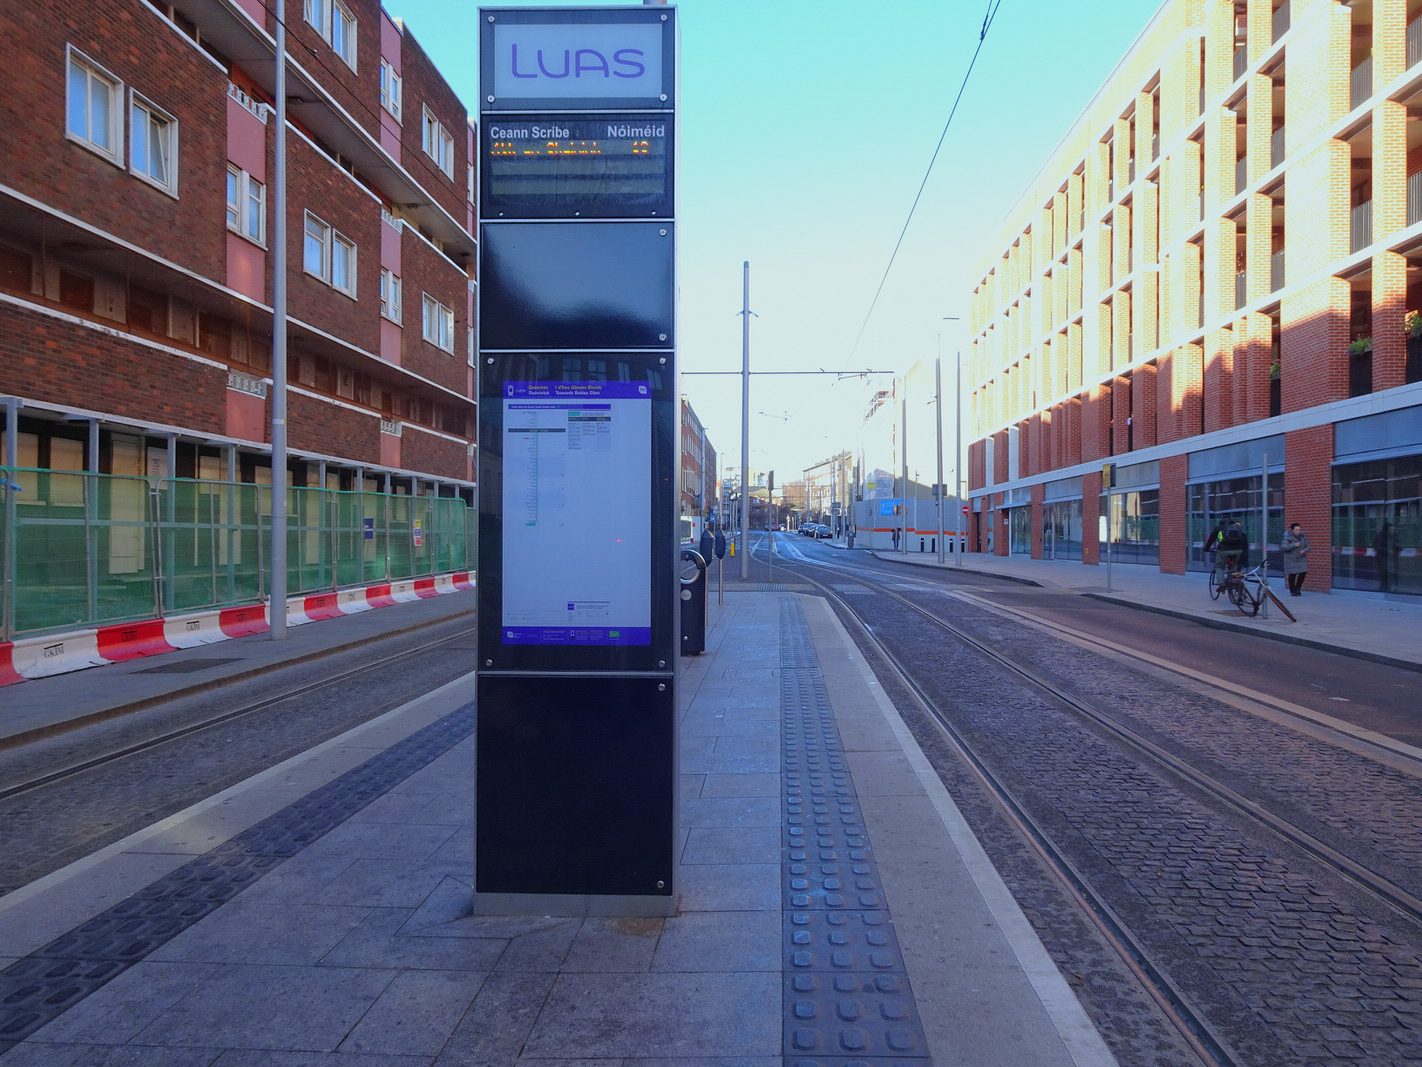 I USUALLY AVOID THE DOMINICK STREET LUAS TRAM STOP 002